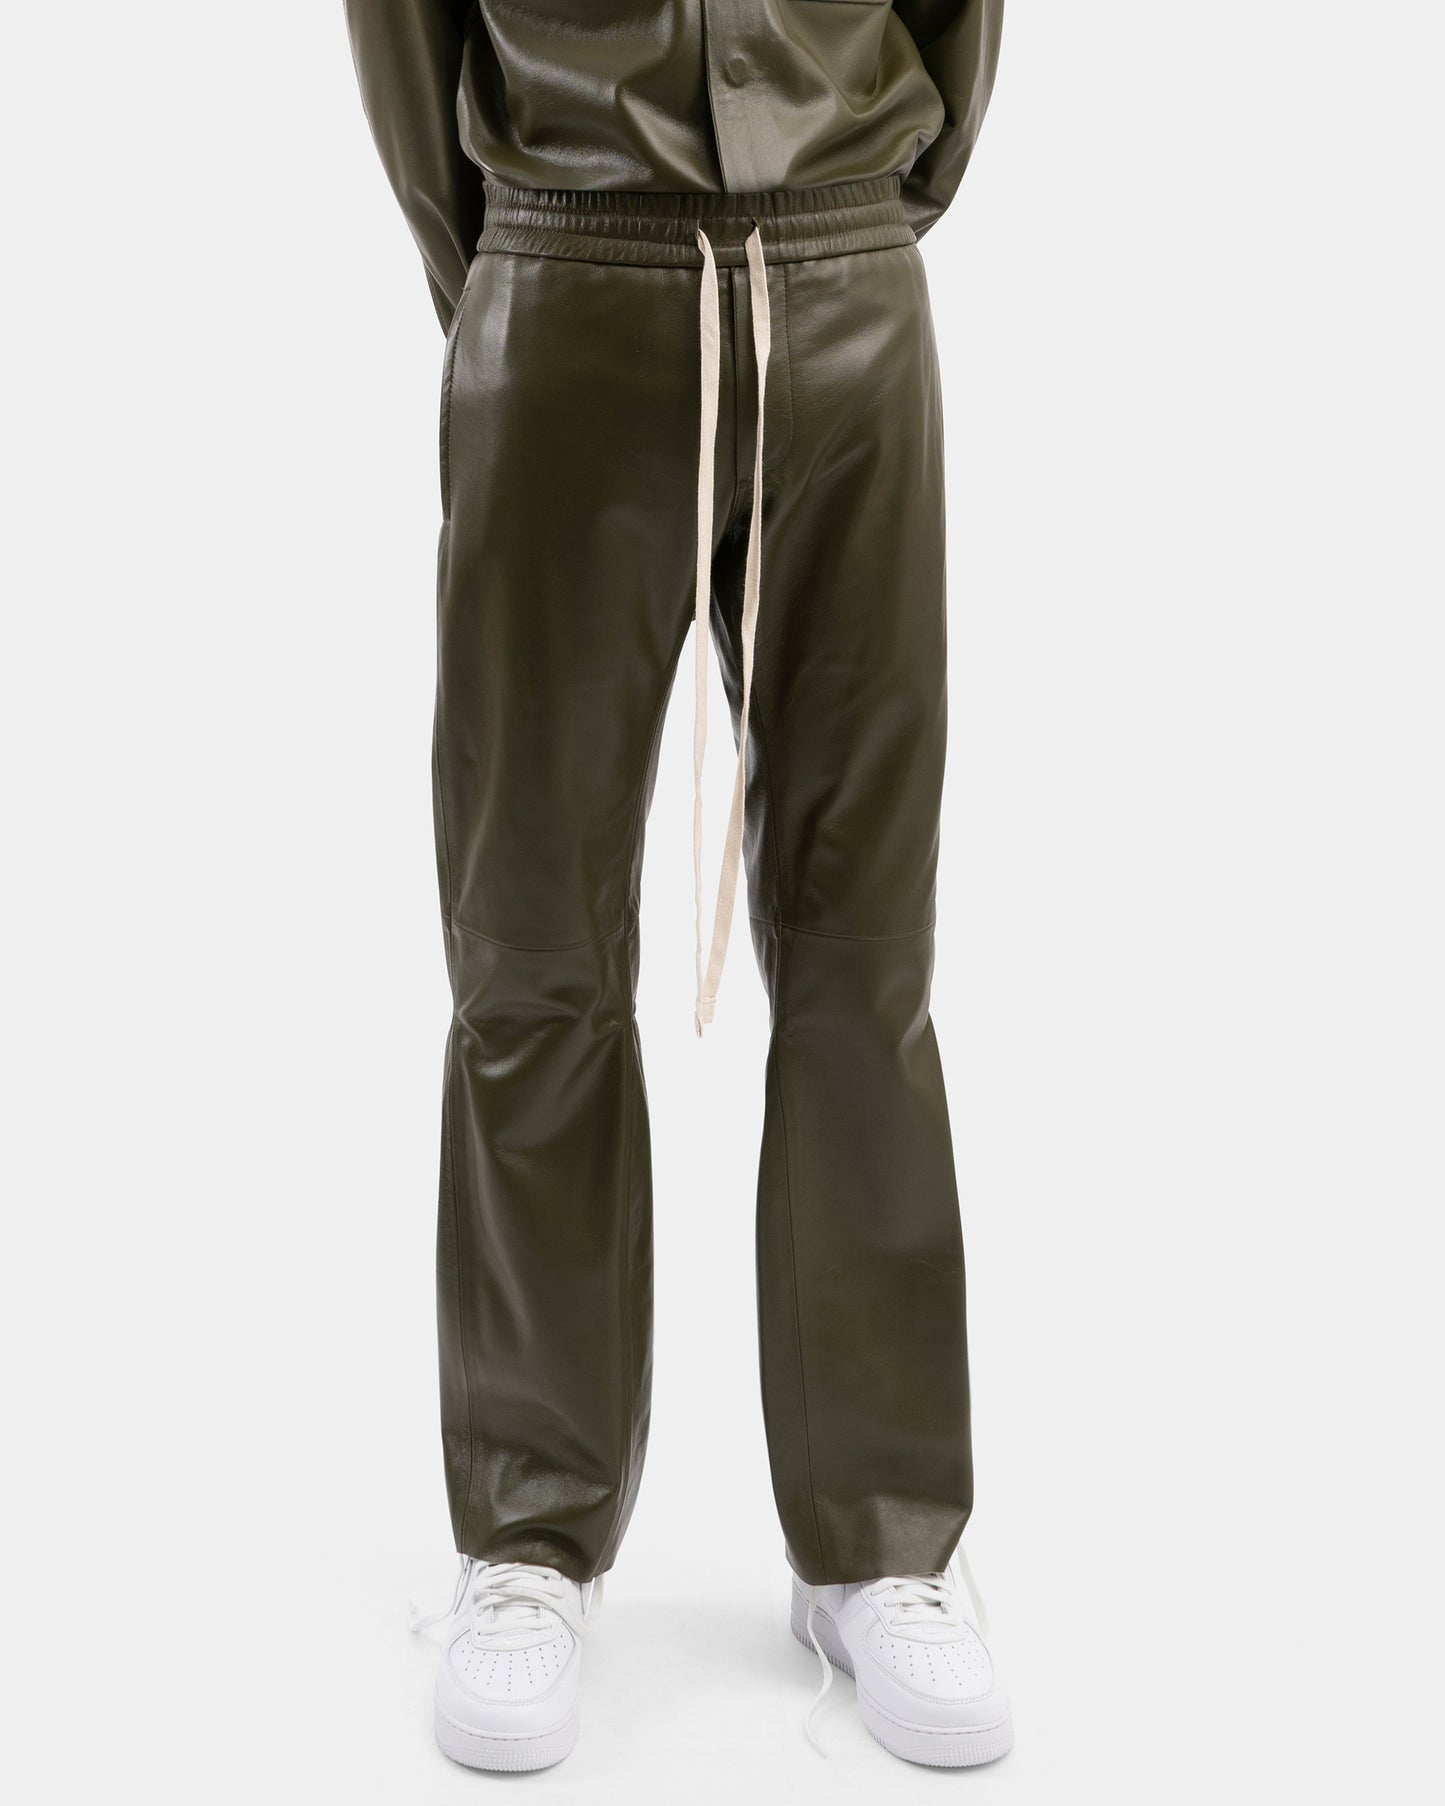 Nappa Leather Trouser - Due Diligence Apparel